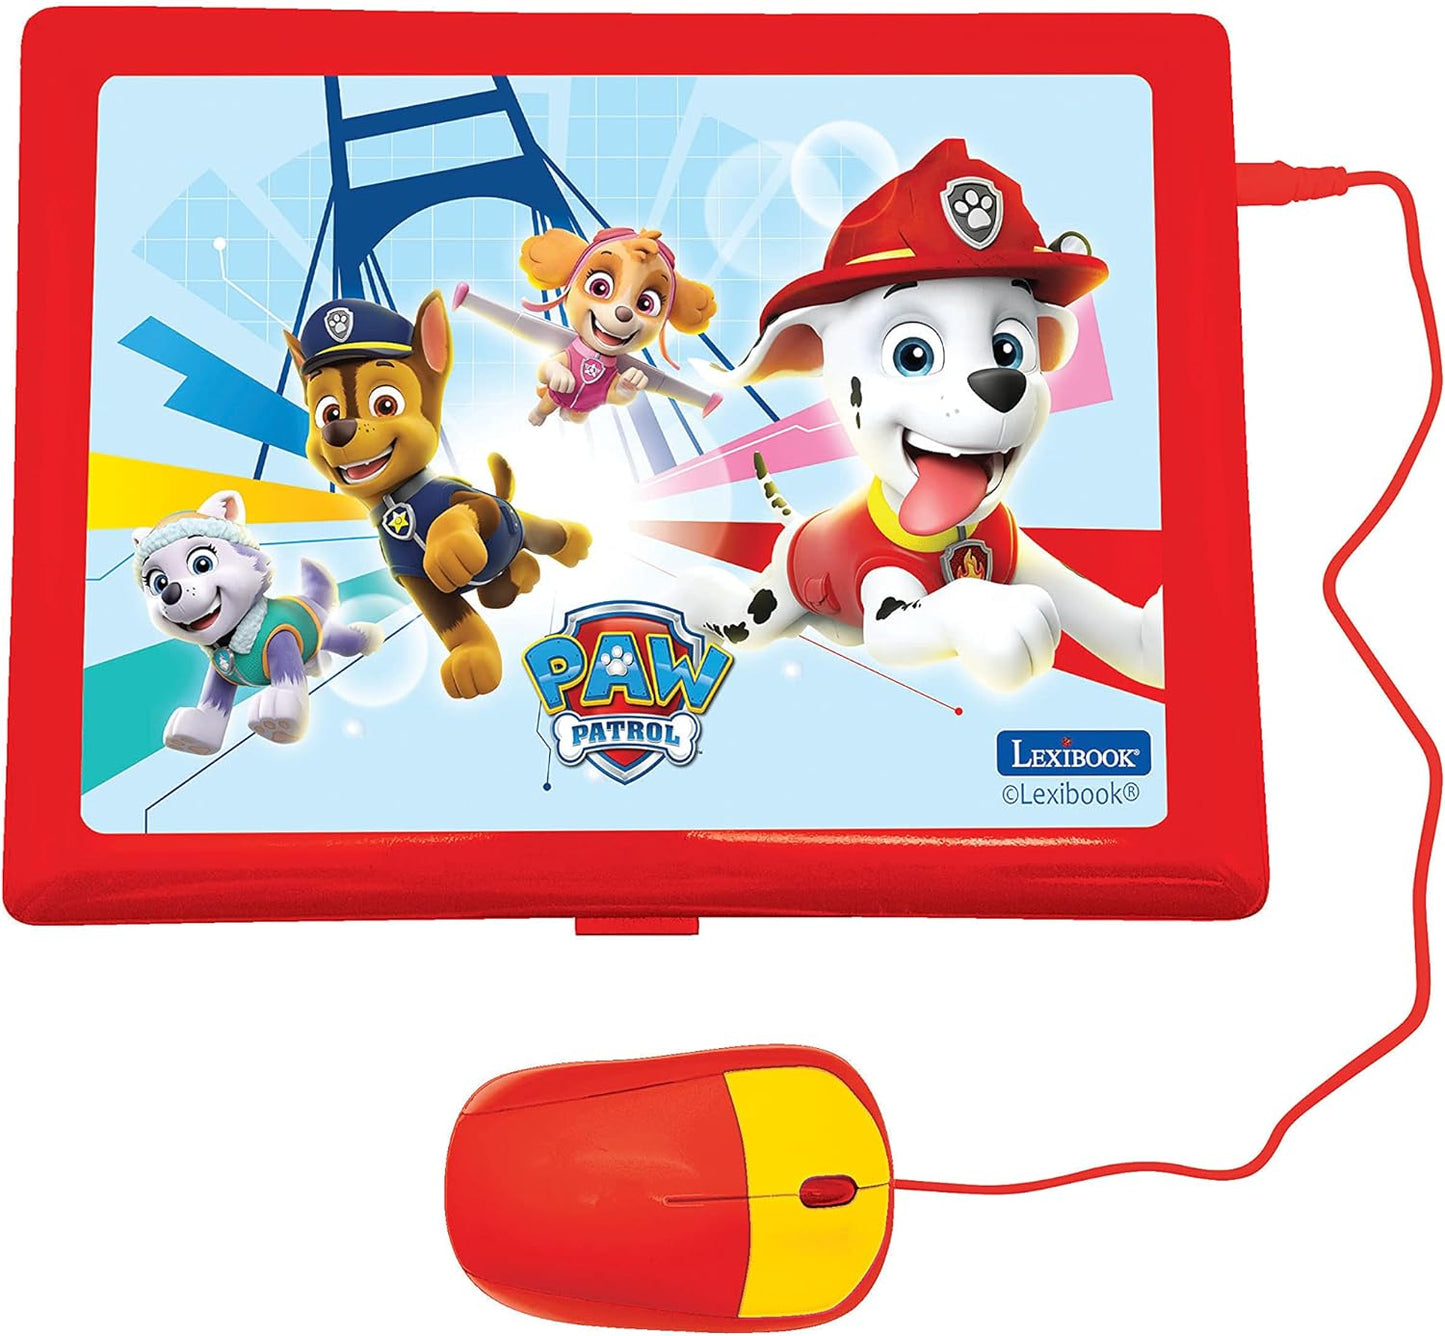 Lexibook - Educational and Bilingual Laptop French/English - Toy for Child Kid 124 Activities, Learn Play Games and Music with Paw Patrol - JC598i1